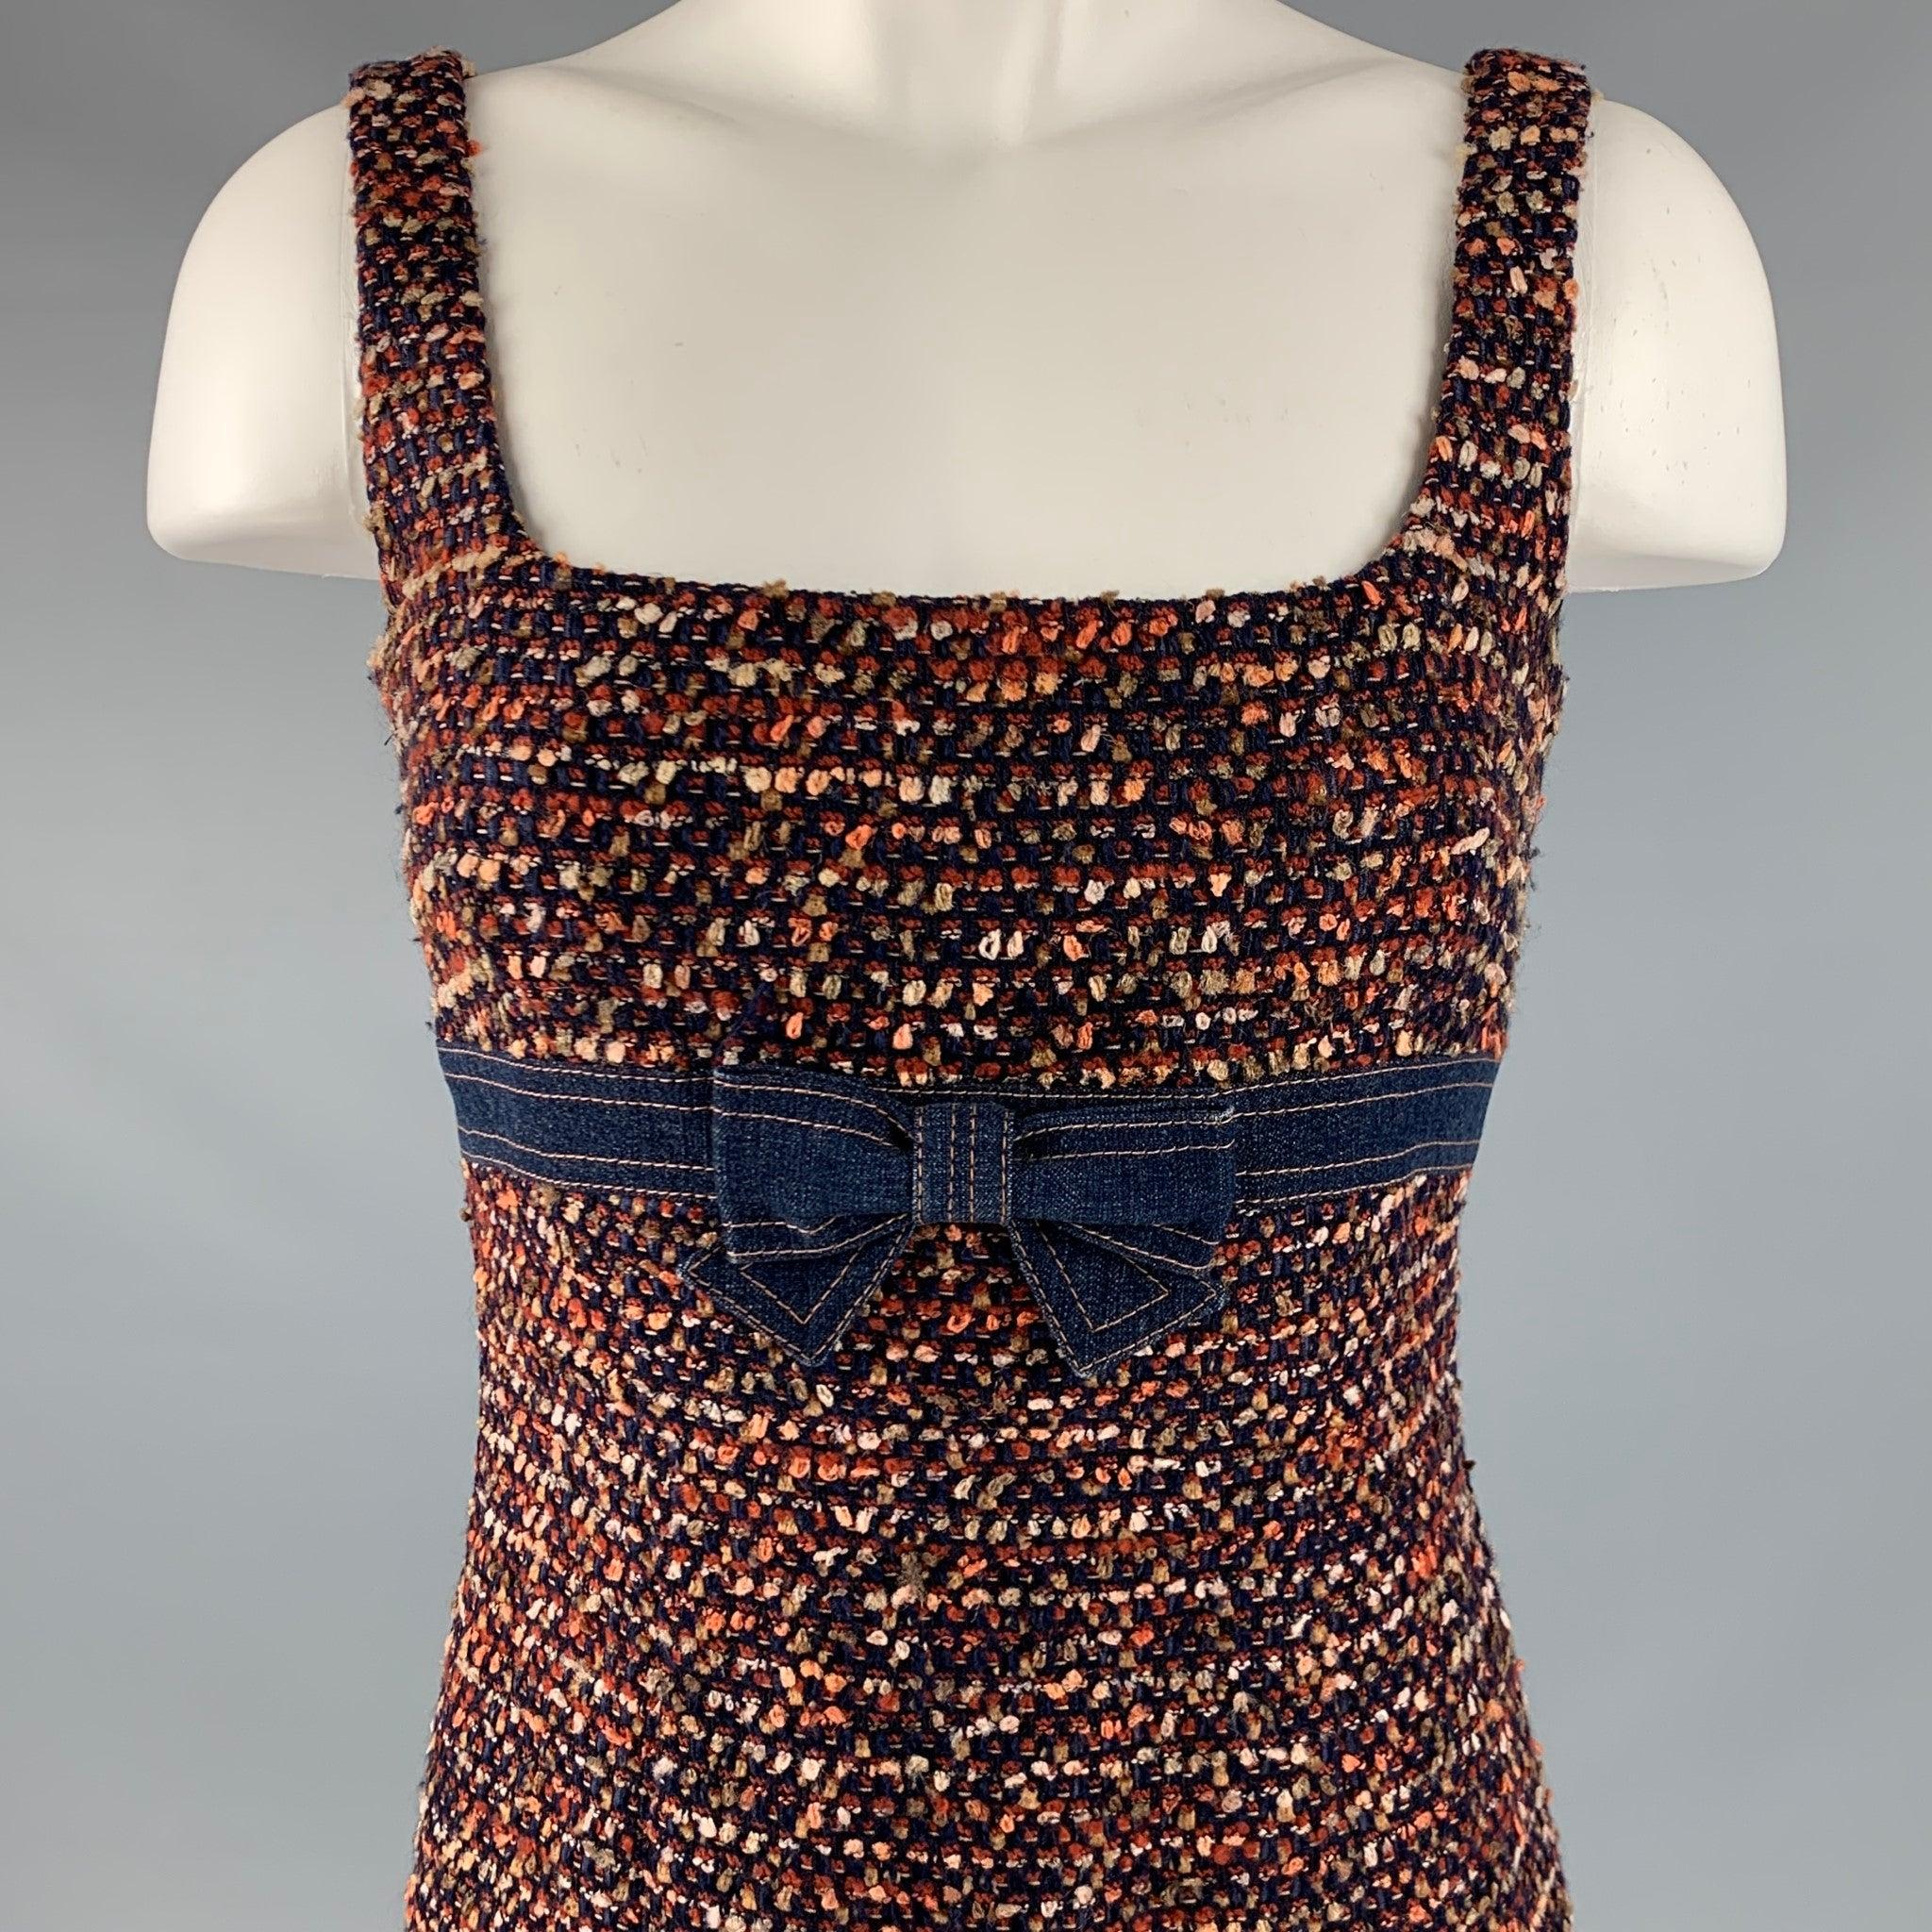 ESCADA dress
in a navy and rust orange wool blend boucle fabric featuring a sleeveless style, knee length, and empire waist with denim bow trim.Excellent Pre-Owned Condition. 

Marked:   34 

Measurements: 
 
Shoulder: 14.5 inches Bust: 30 inches